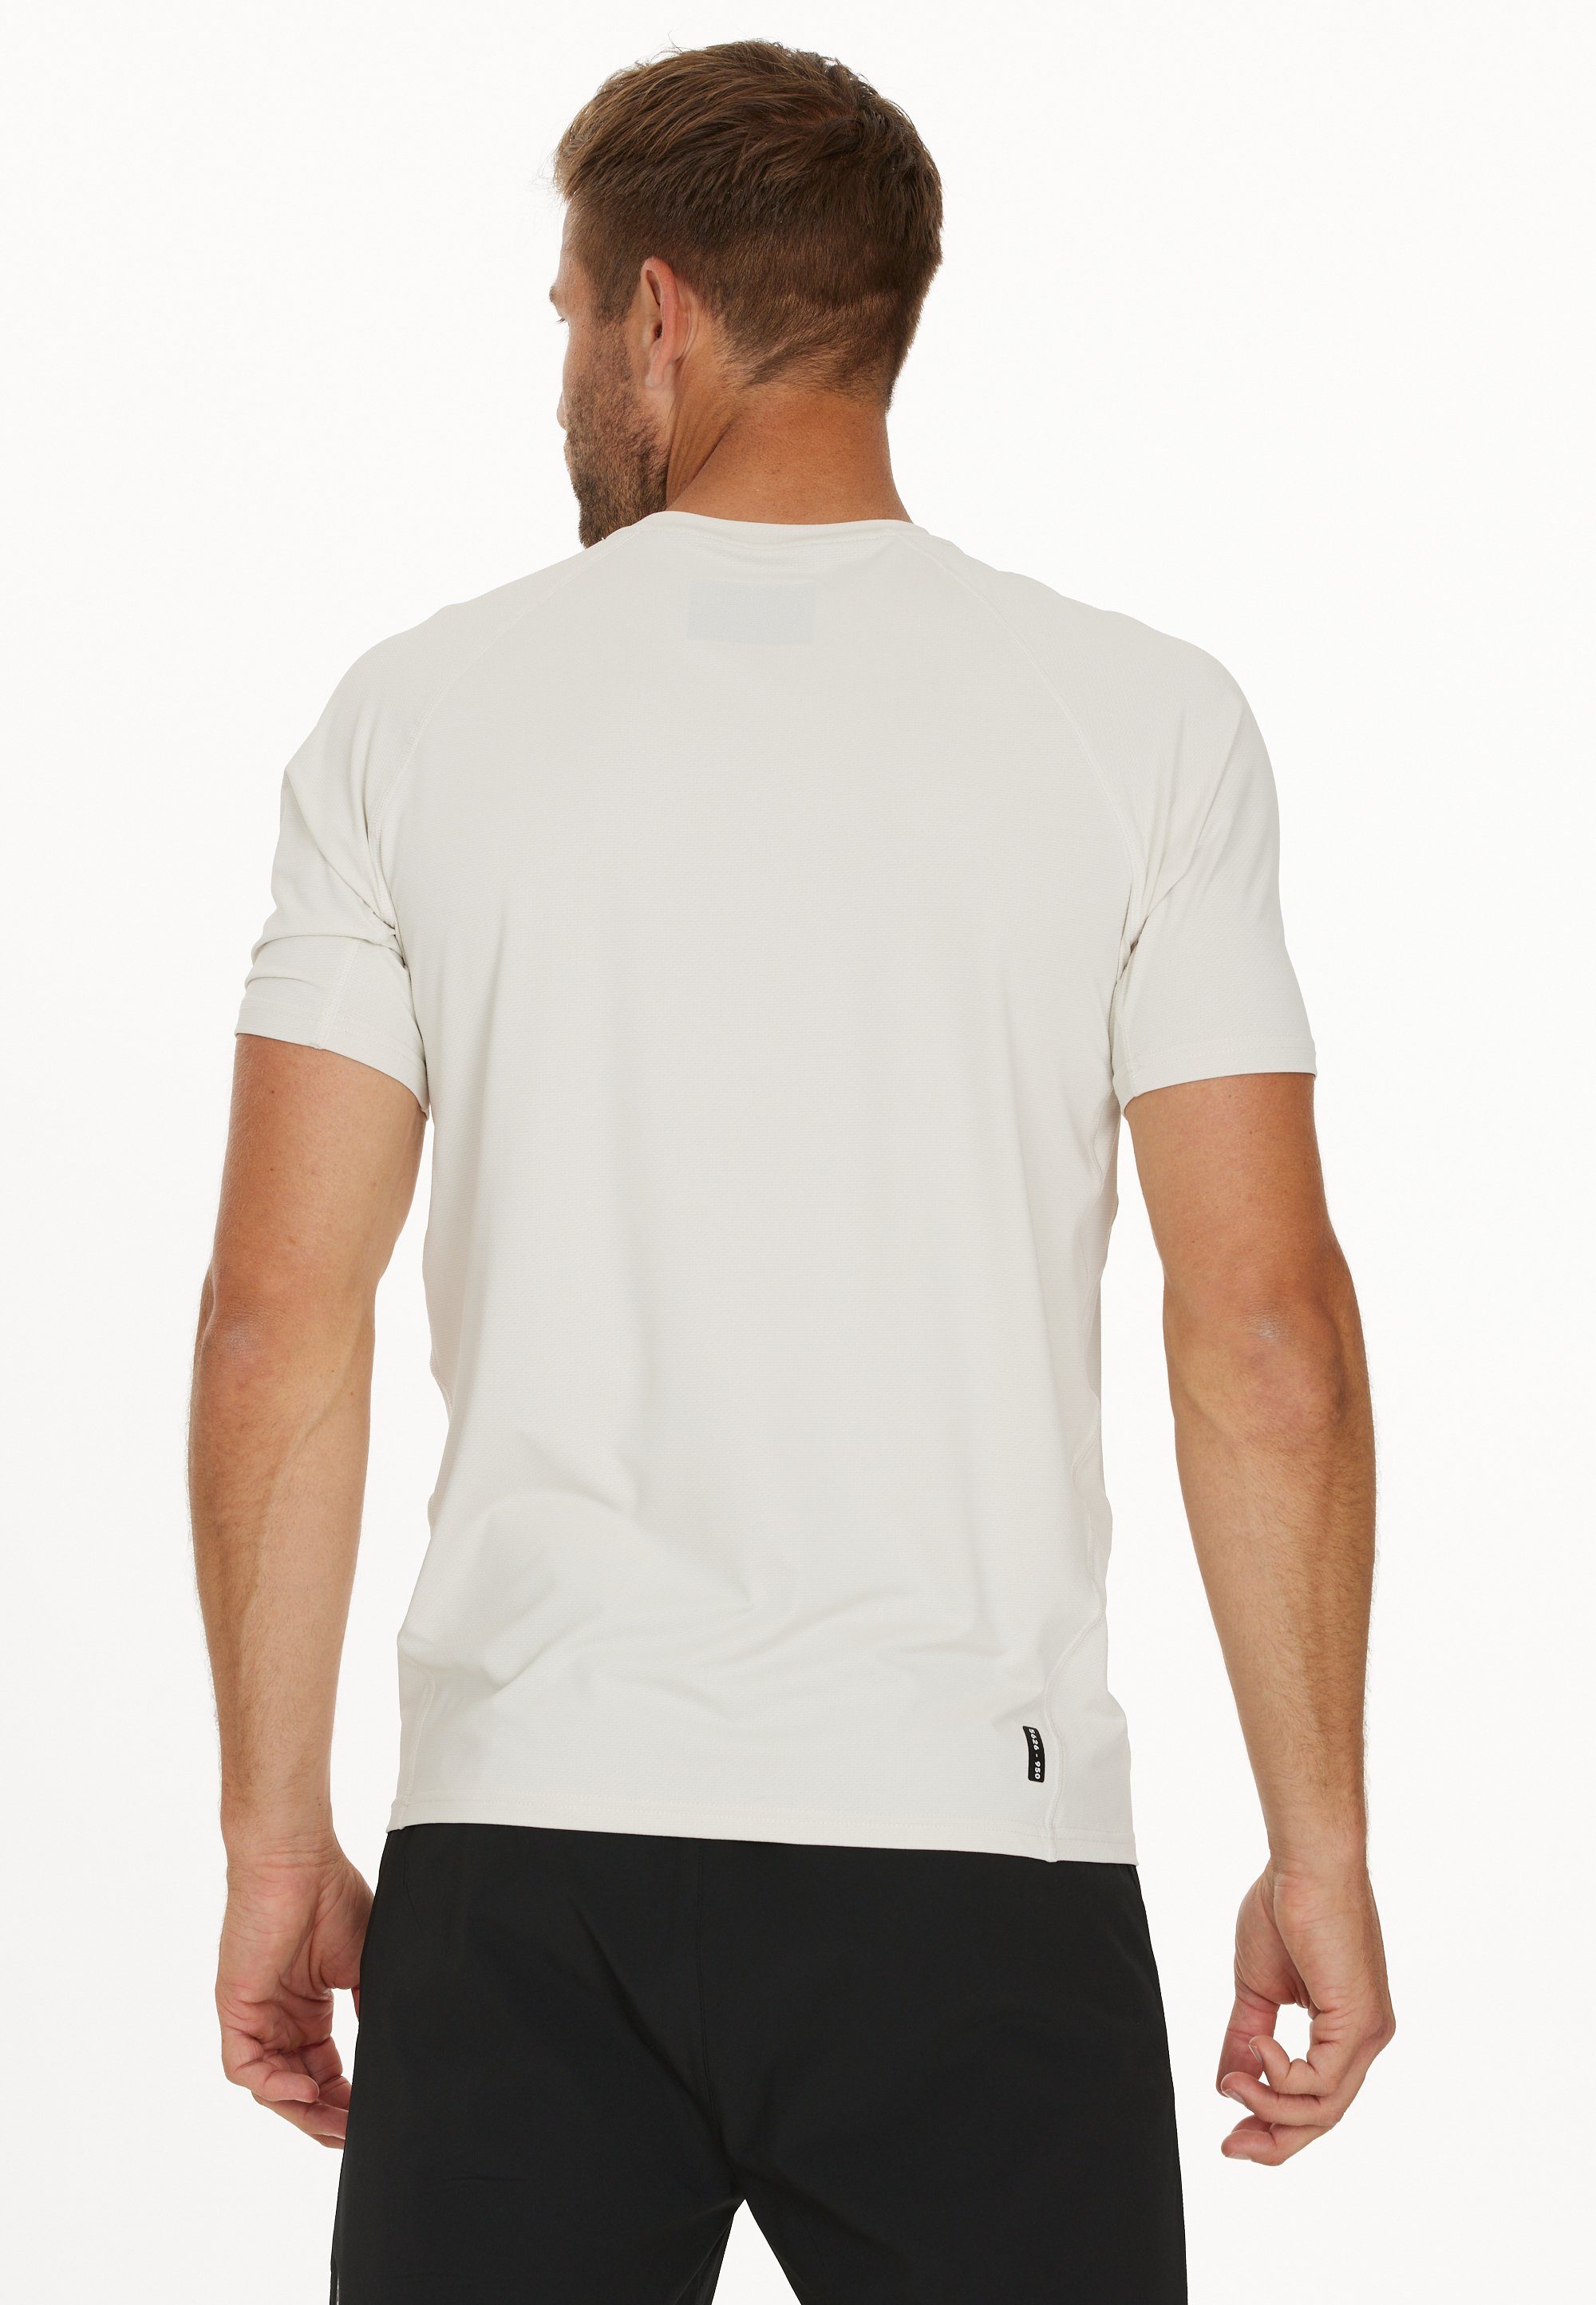 Virtus Muskelshirt Toscan (1-tlg) mit Silver+-Technologie offwhite